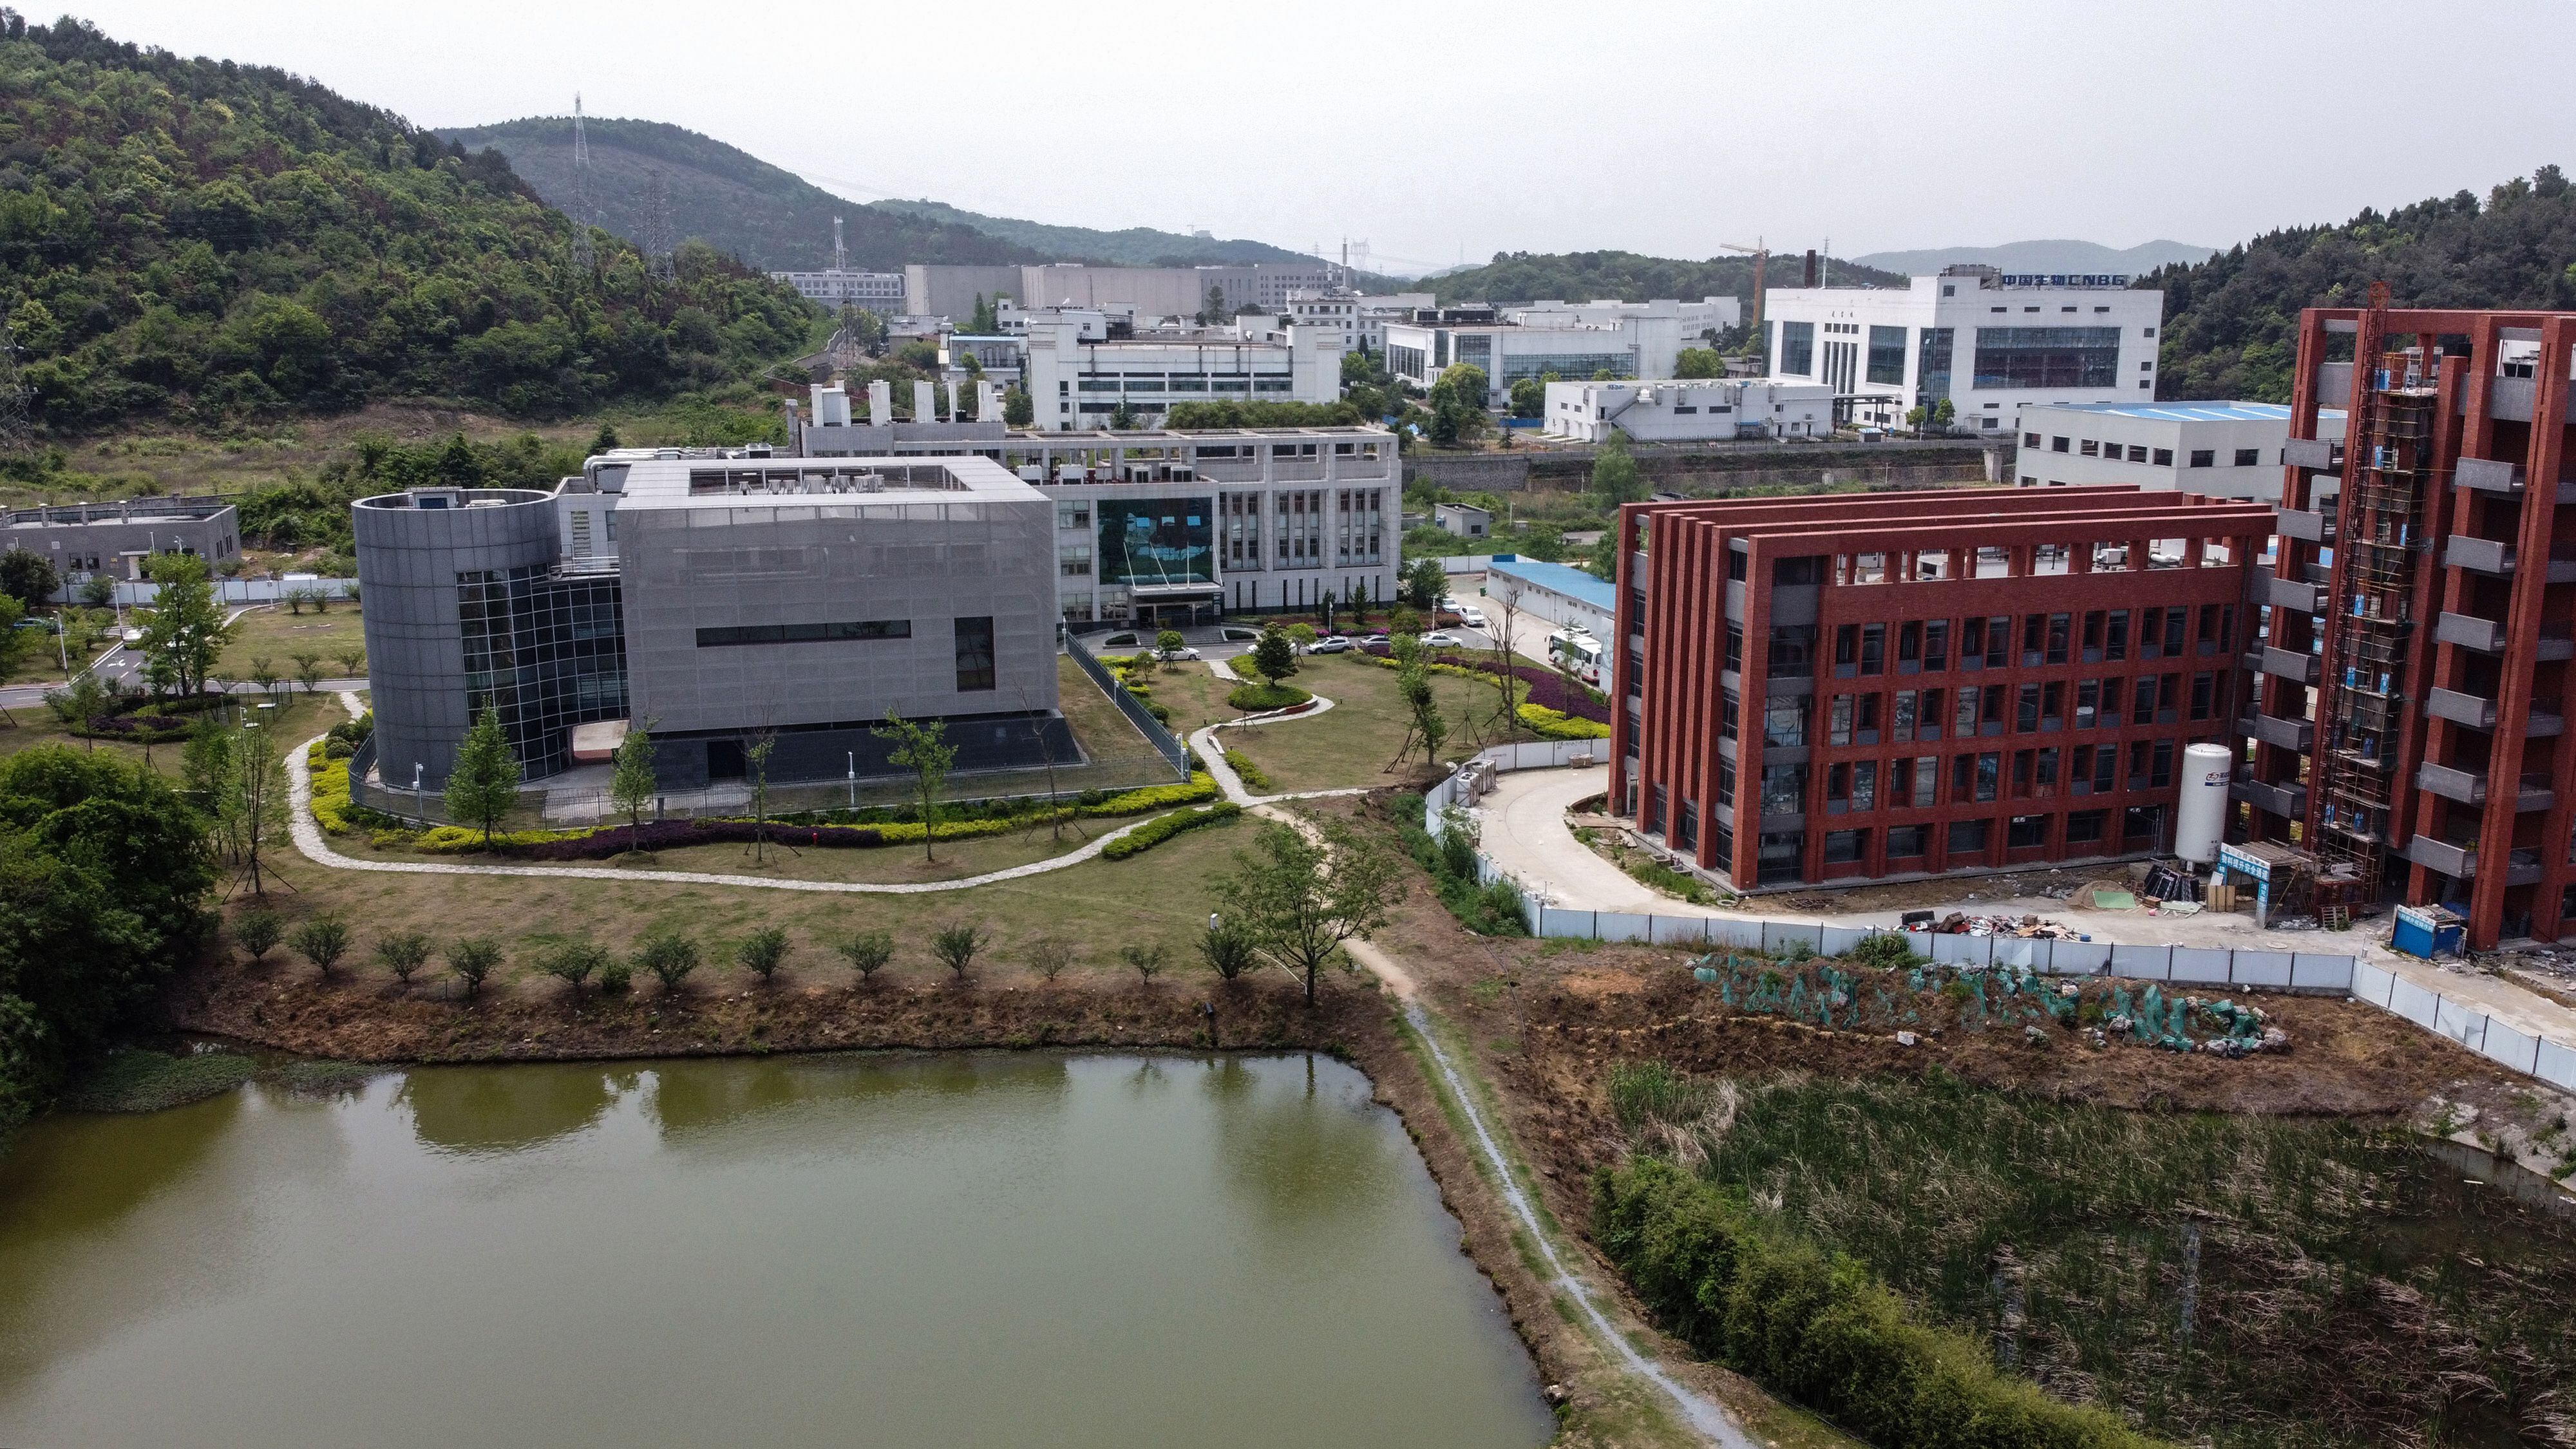 An aerial view shows the P4 laboratory (L) at the Wuhan Institute of Virology in Wuhan in China's central Hubei province on April 17, 2020. - The P4 epidemiological laboratory was built in co-operation with French bio-industrial firm Institut Merieux and the Chinese Academy of Sciences. The facility is among a handful of labs around the world cleared to handle Class 4 pathogens (P4) - dangerous viruses that pose a high risk of person-to-person transmission. (Photo by Hector RETAMAL / AFP)